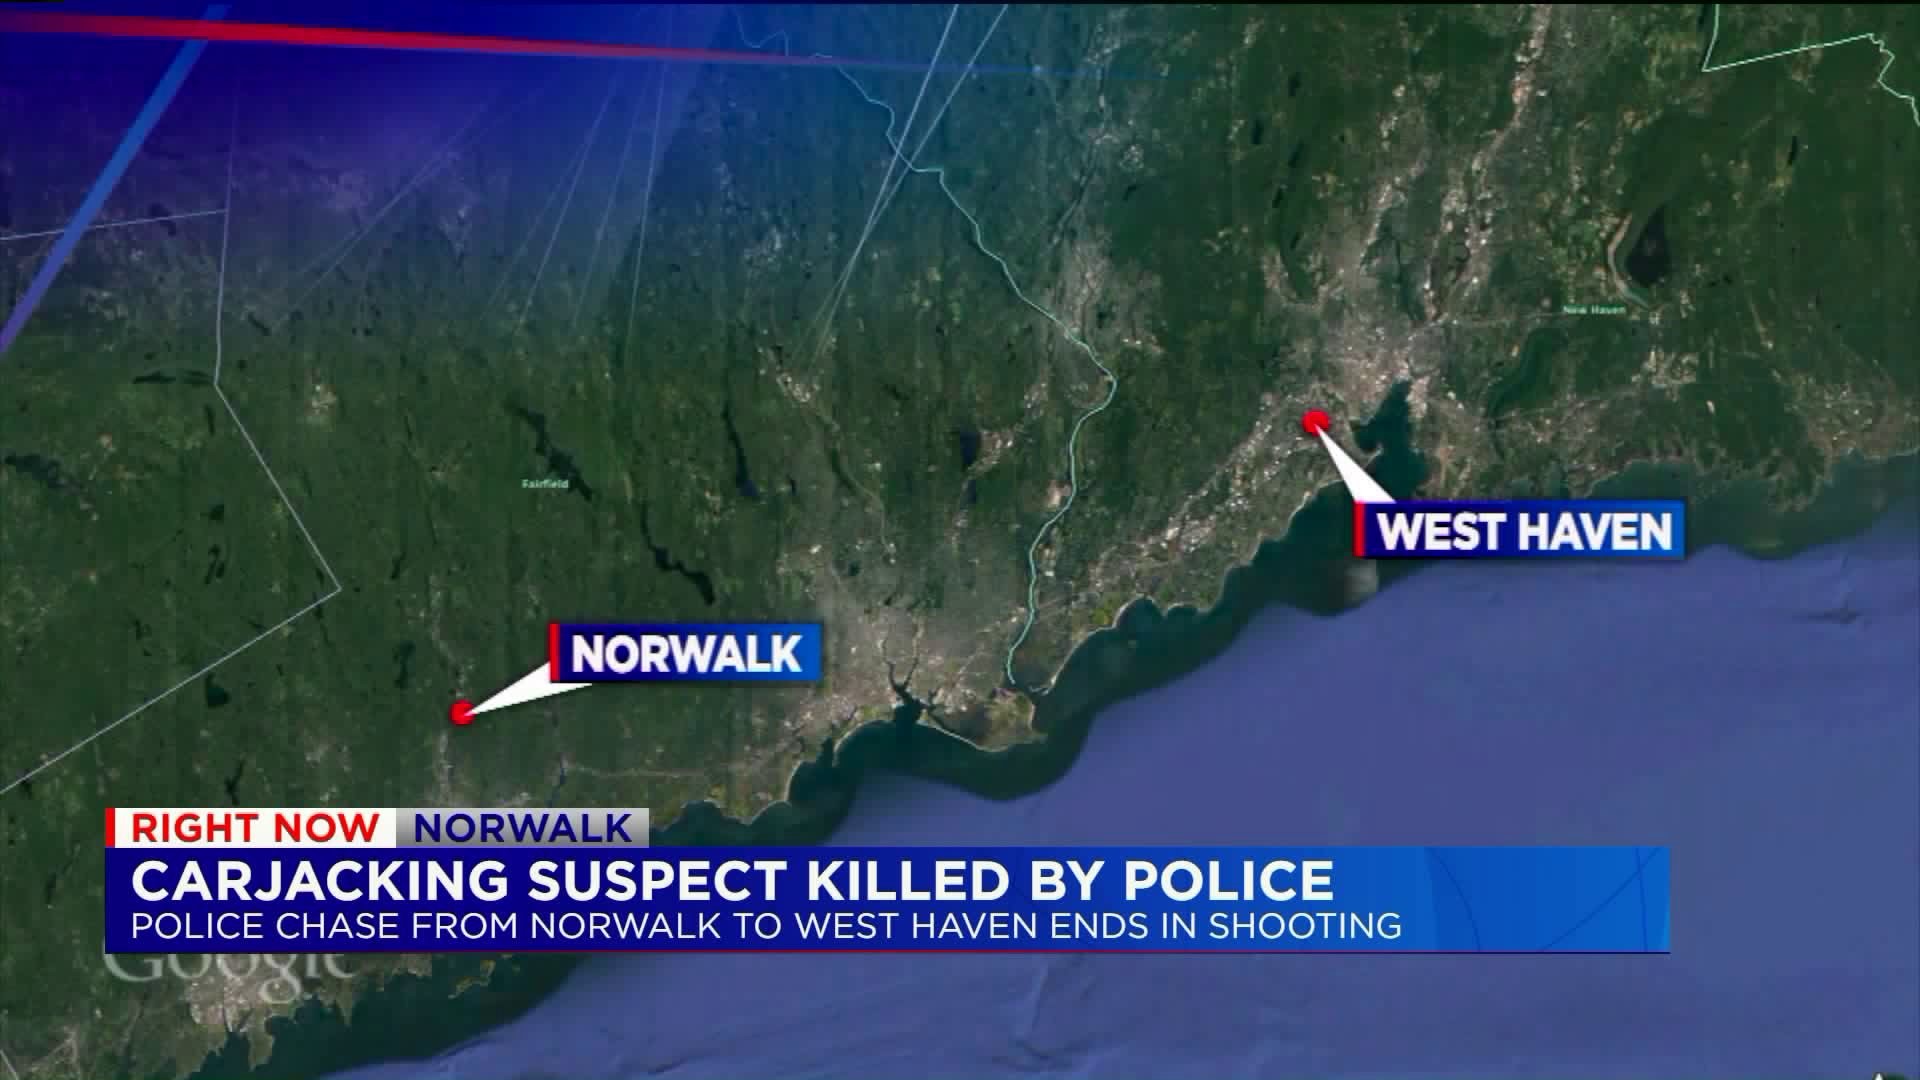 State Police identify carjacking suspect killed in officer-involved shooting following pursuit